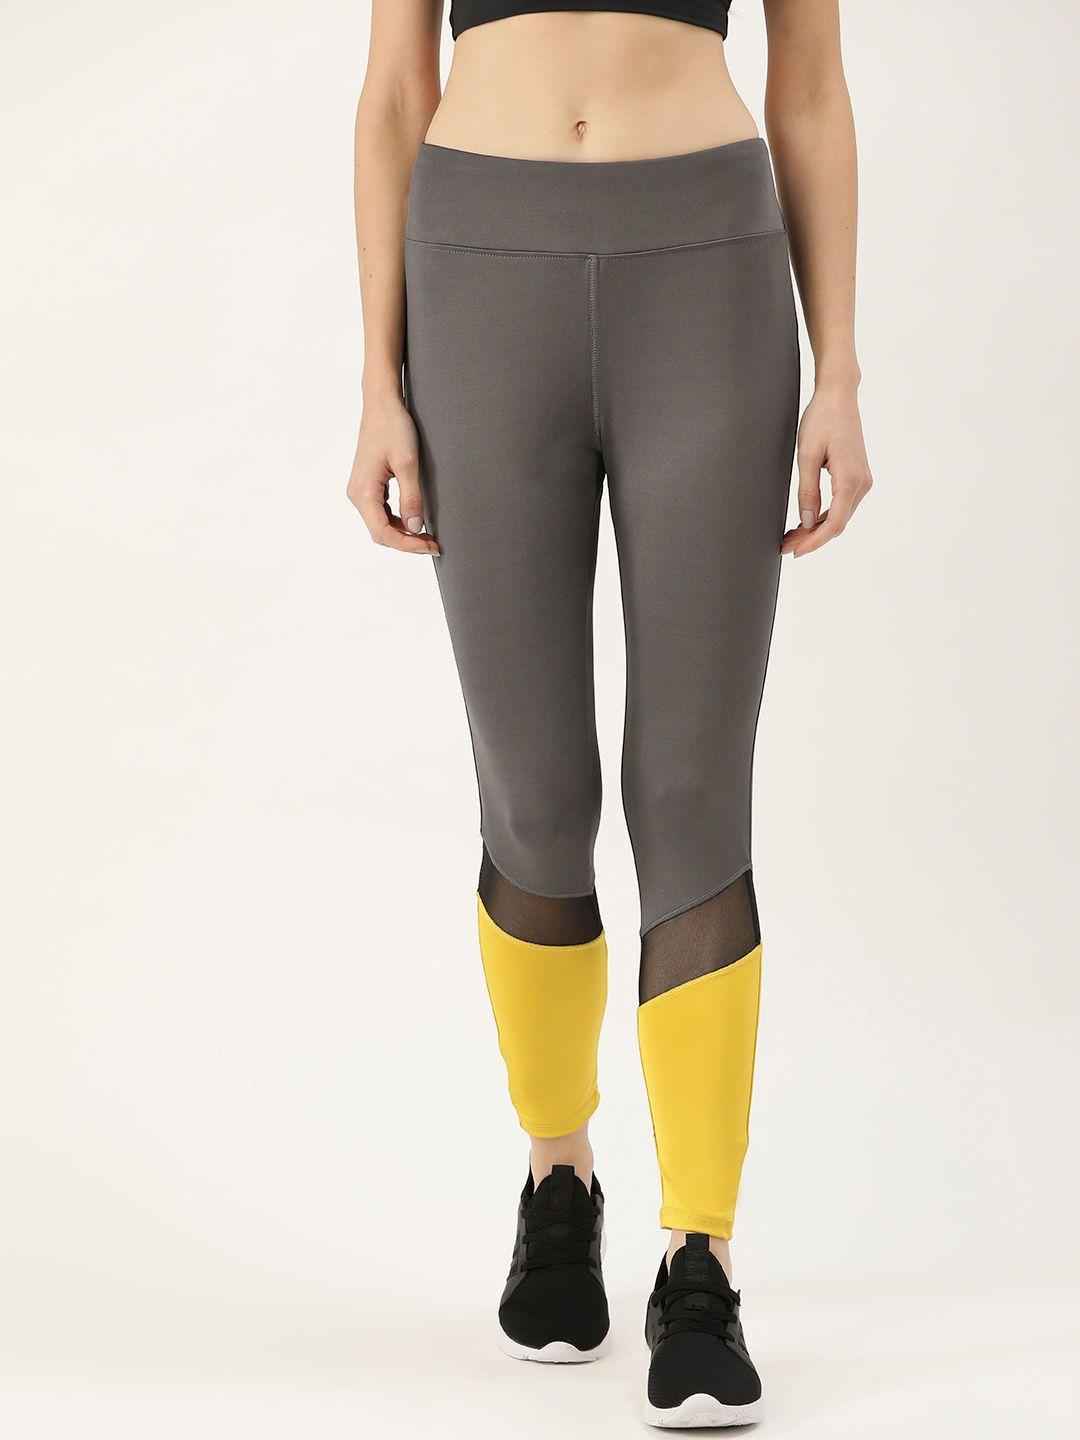 dressberry women charcoal grey & mustard yellow colourblocked cropped tights